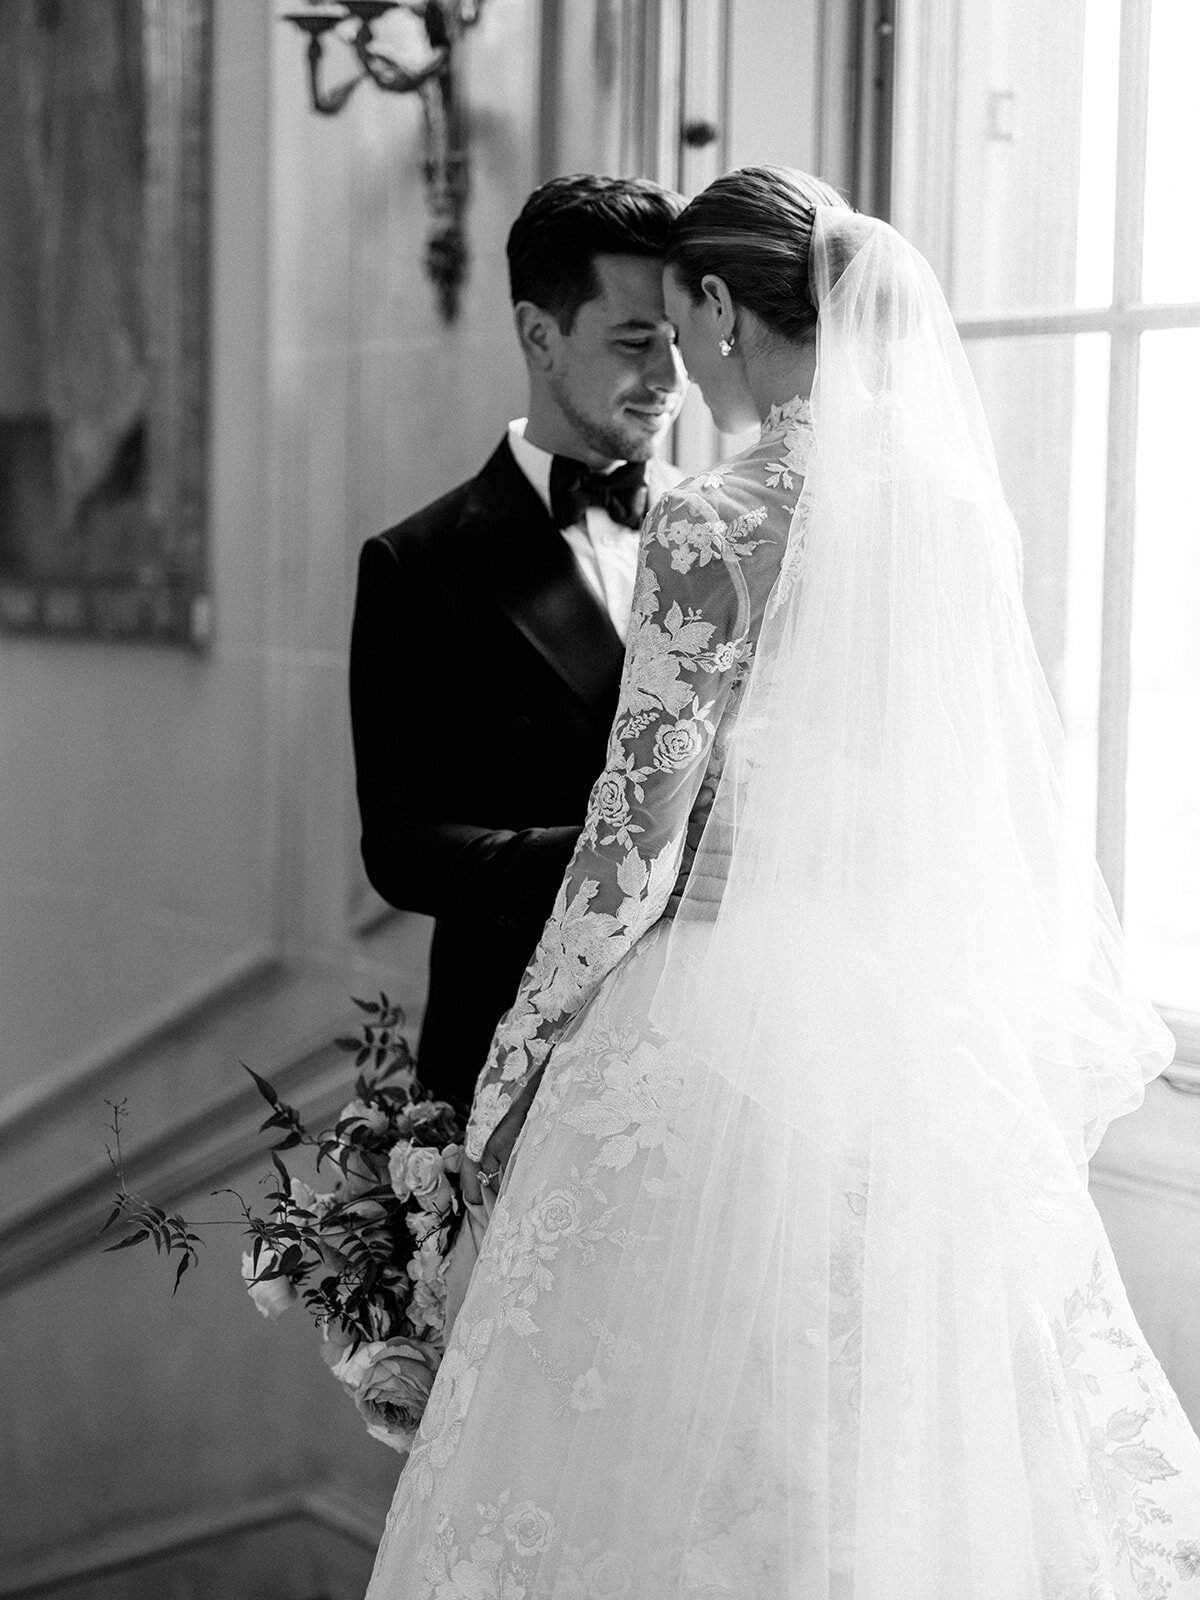 A black and white image of a couple by the window of Larz anderson wearing a tuxedo and gorgeous lace wedding gown.